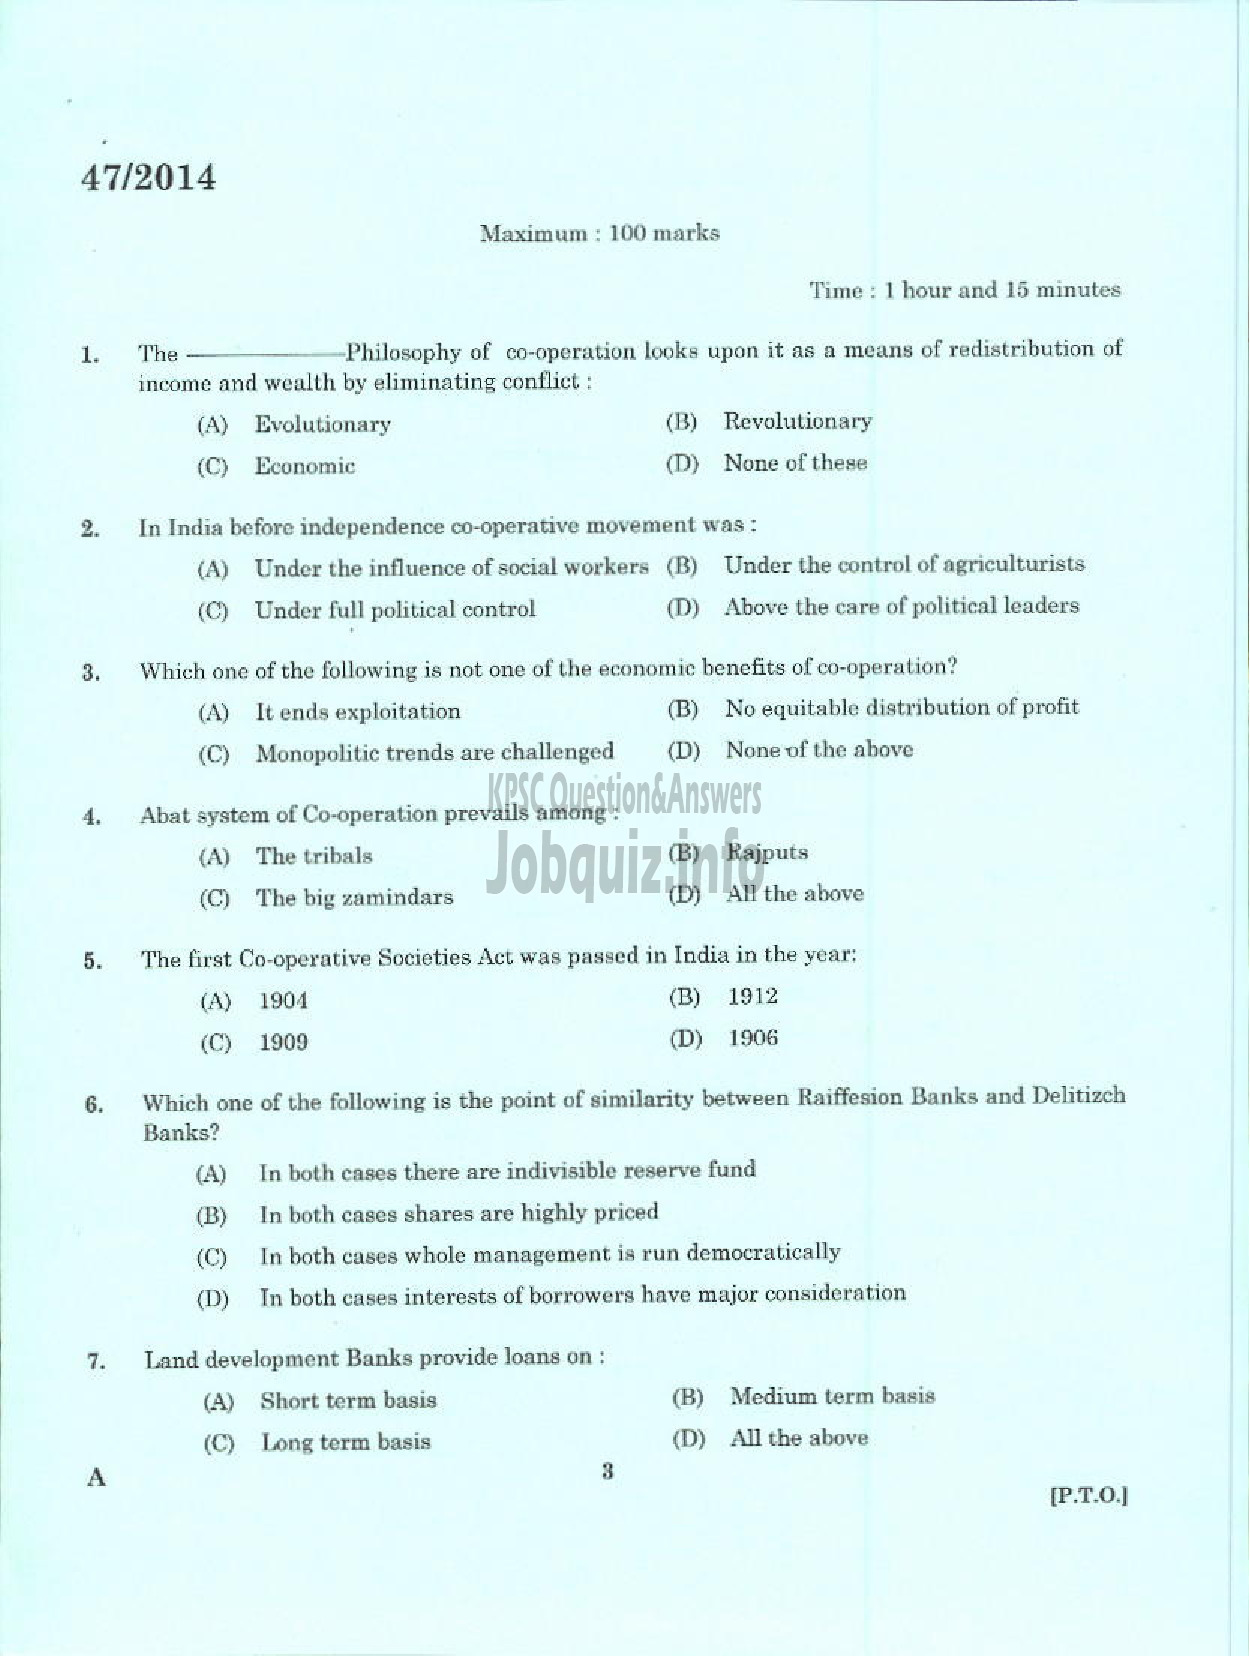 Kerala PSC Question Paper - ASSISTANT MANAGER APEX SOCIETIES OF CO OPERATIVE SECTOR IN KERALA-1